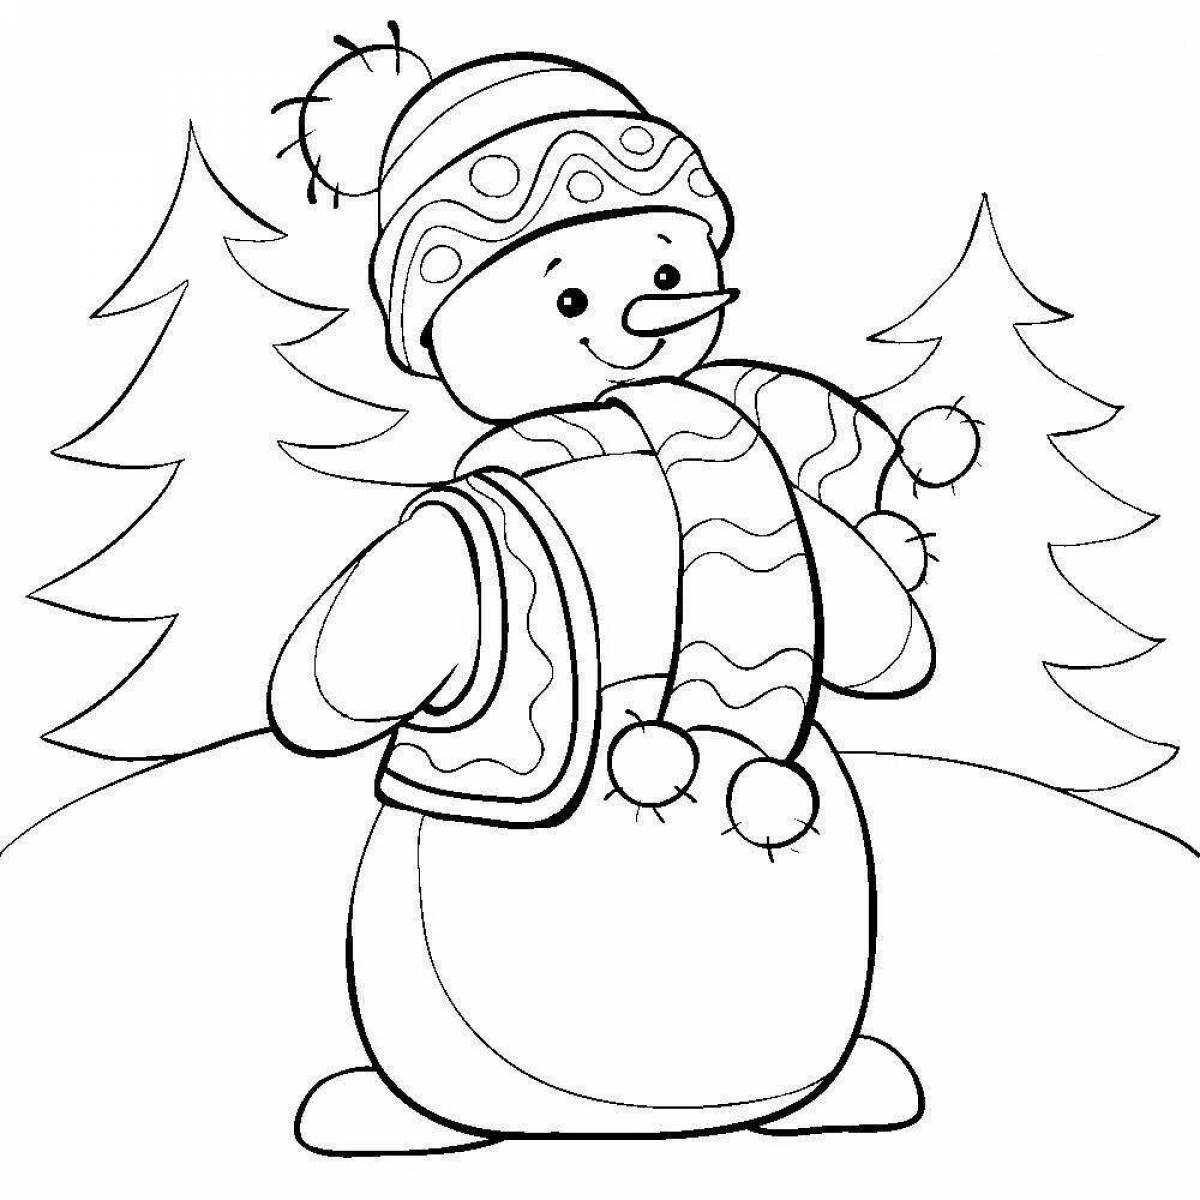 Glitter snowman coloring page